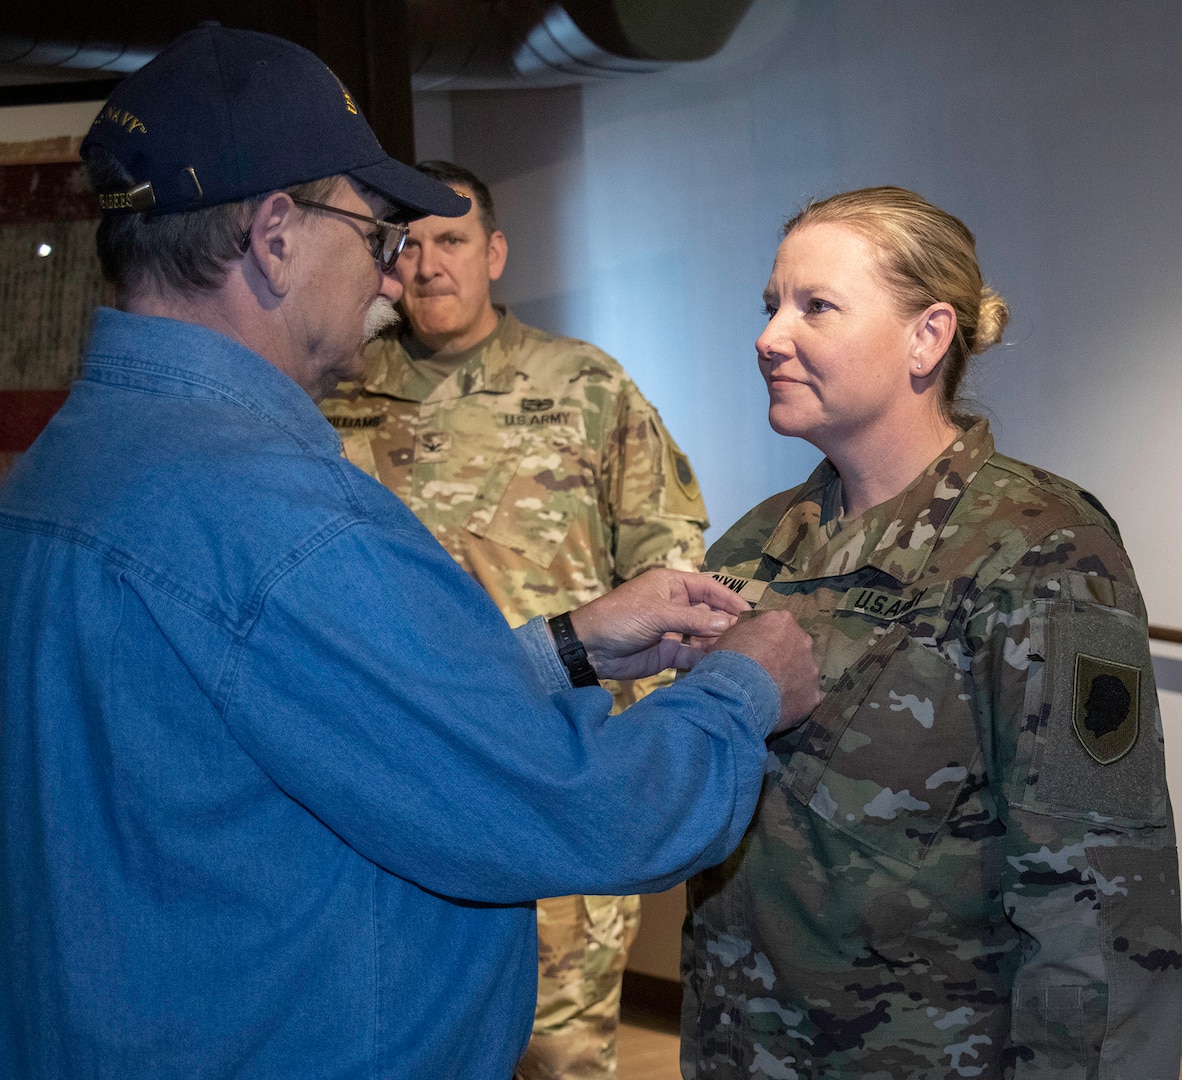 Tim Pettyjohn, father of newly promoted CW4 Lindsay Glynn, secures her new rank during a promotion ceremony March 25 at the Illinois State Military Museum in Springfield, Illinois.